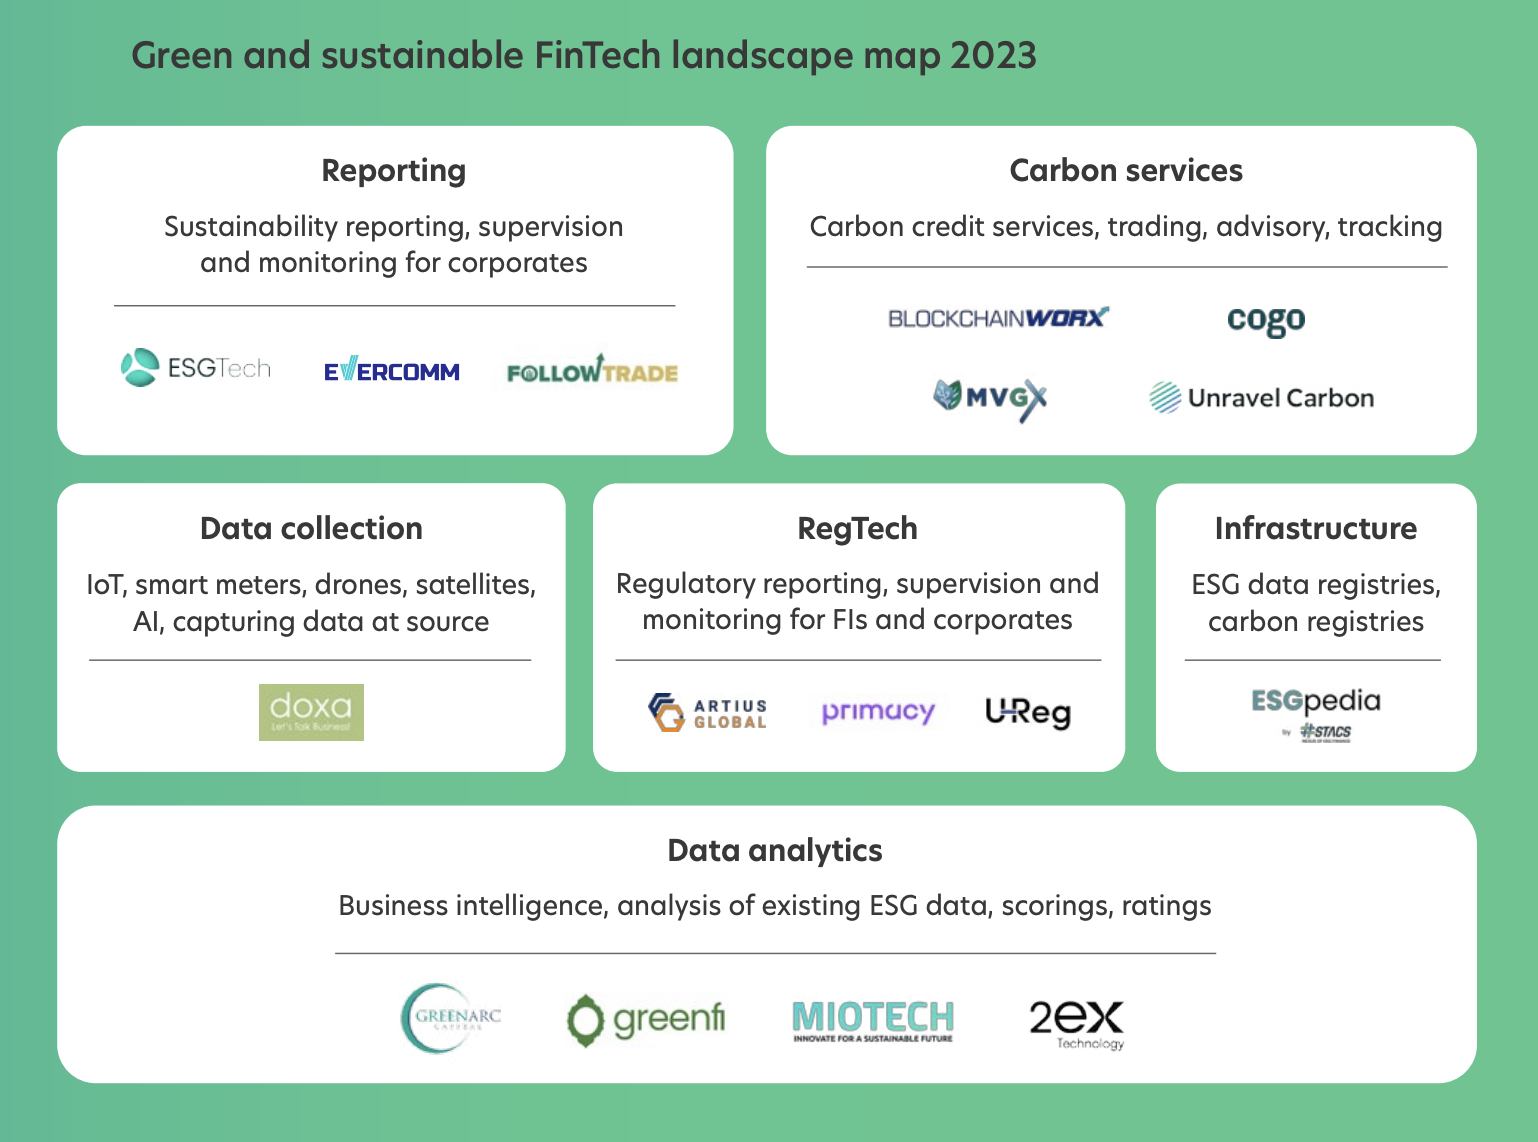 Green and sustainable fintech landscape map 2023, Source: Fintech in ASEAN 2023: Seeding the Green Transition, UOB, PwC Singapore and the Singapore Fintech Association (SFA), Nov 2023